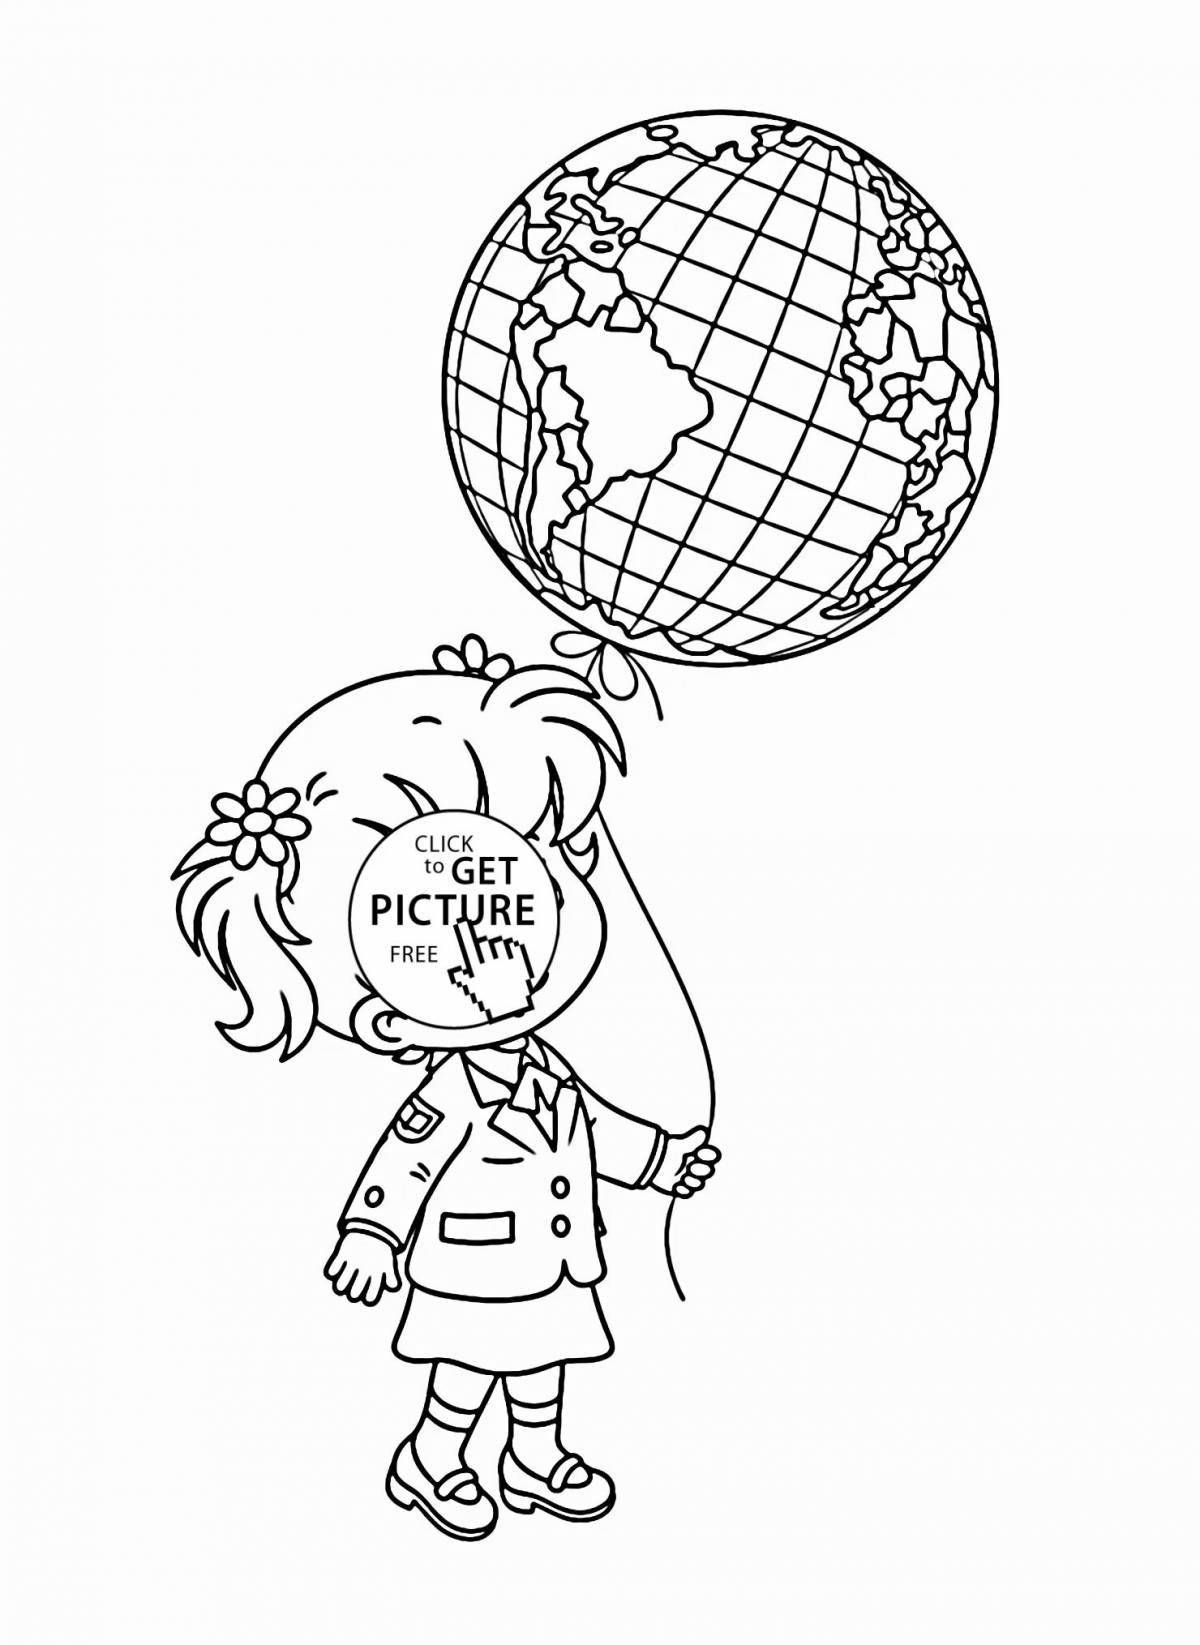 Fat globe coloring page